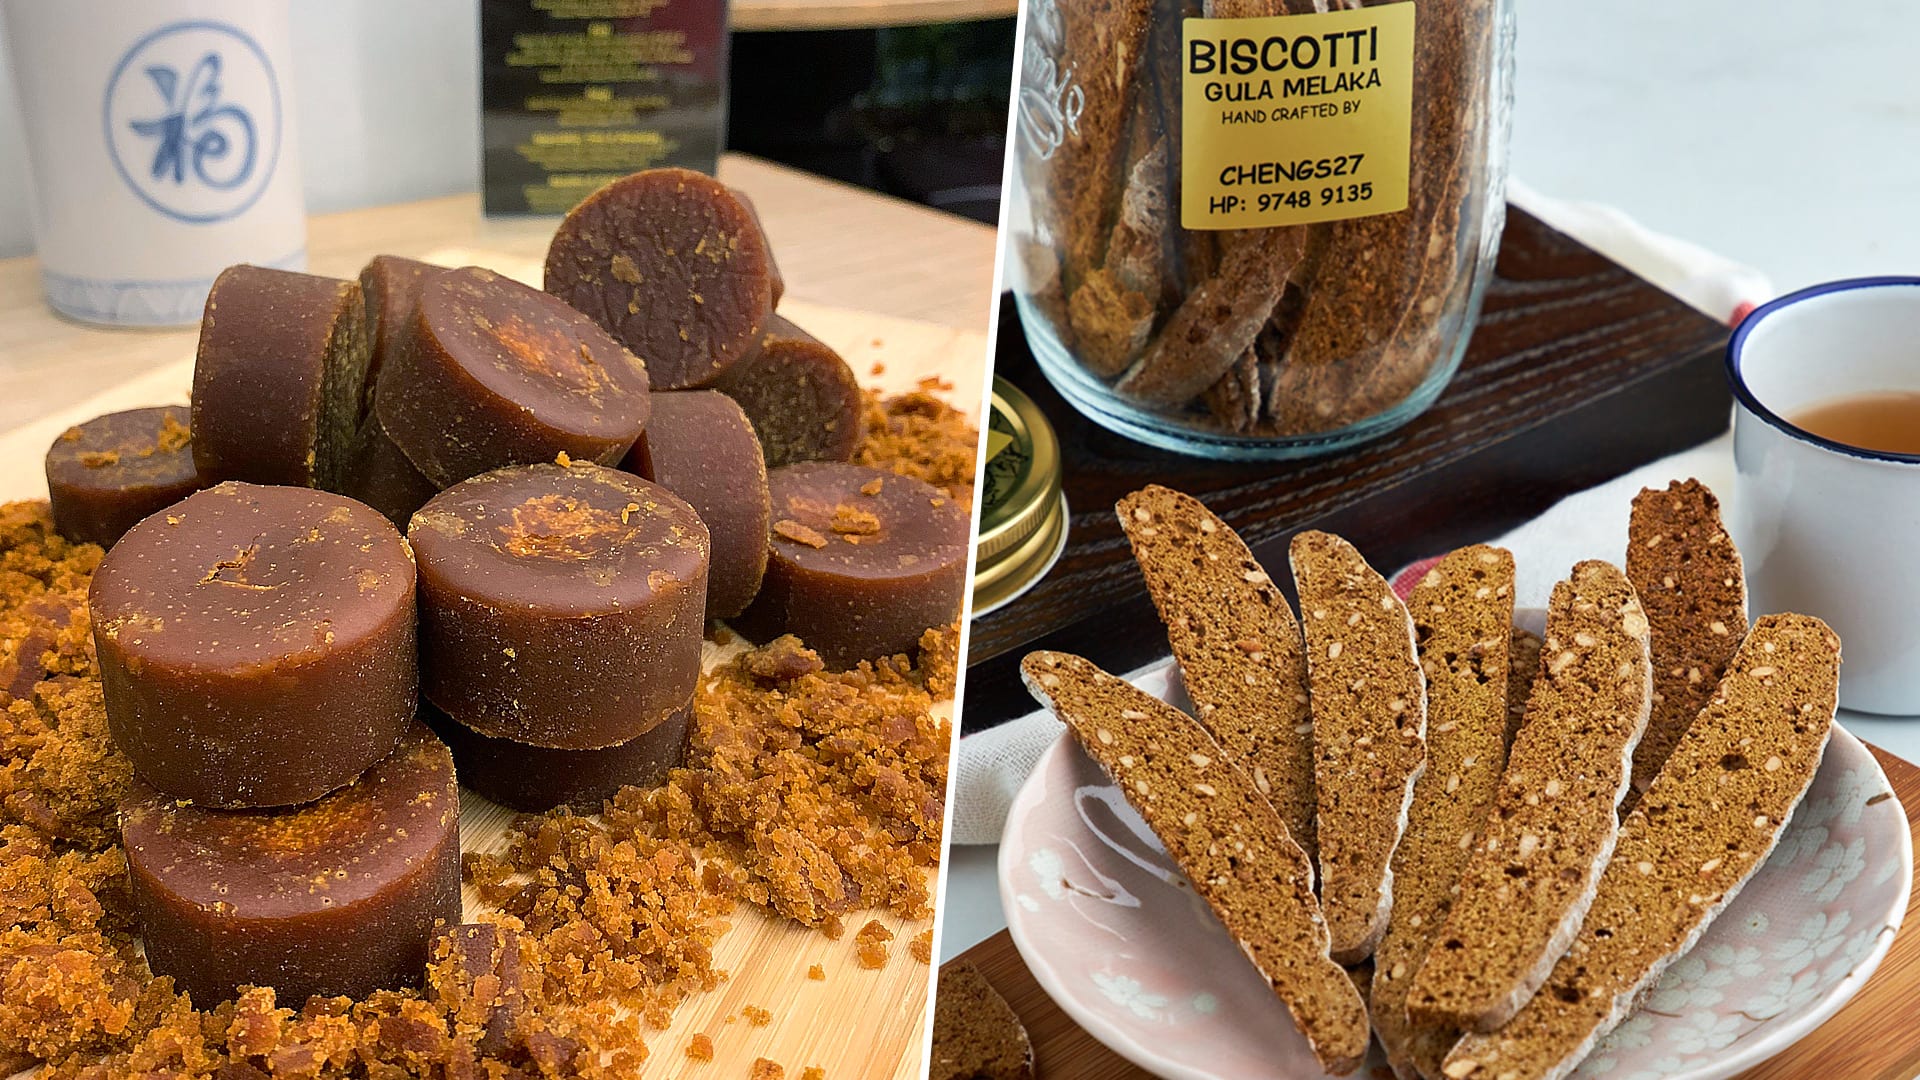 Would You Pay $50 For This Jar Of Gula Melaka Biscotti?